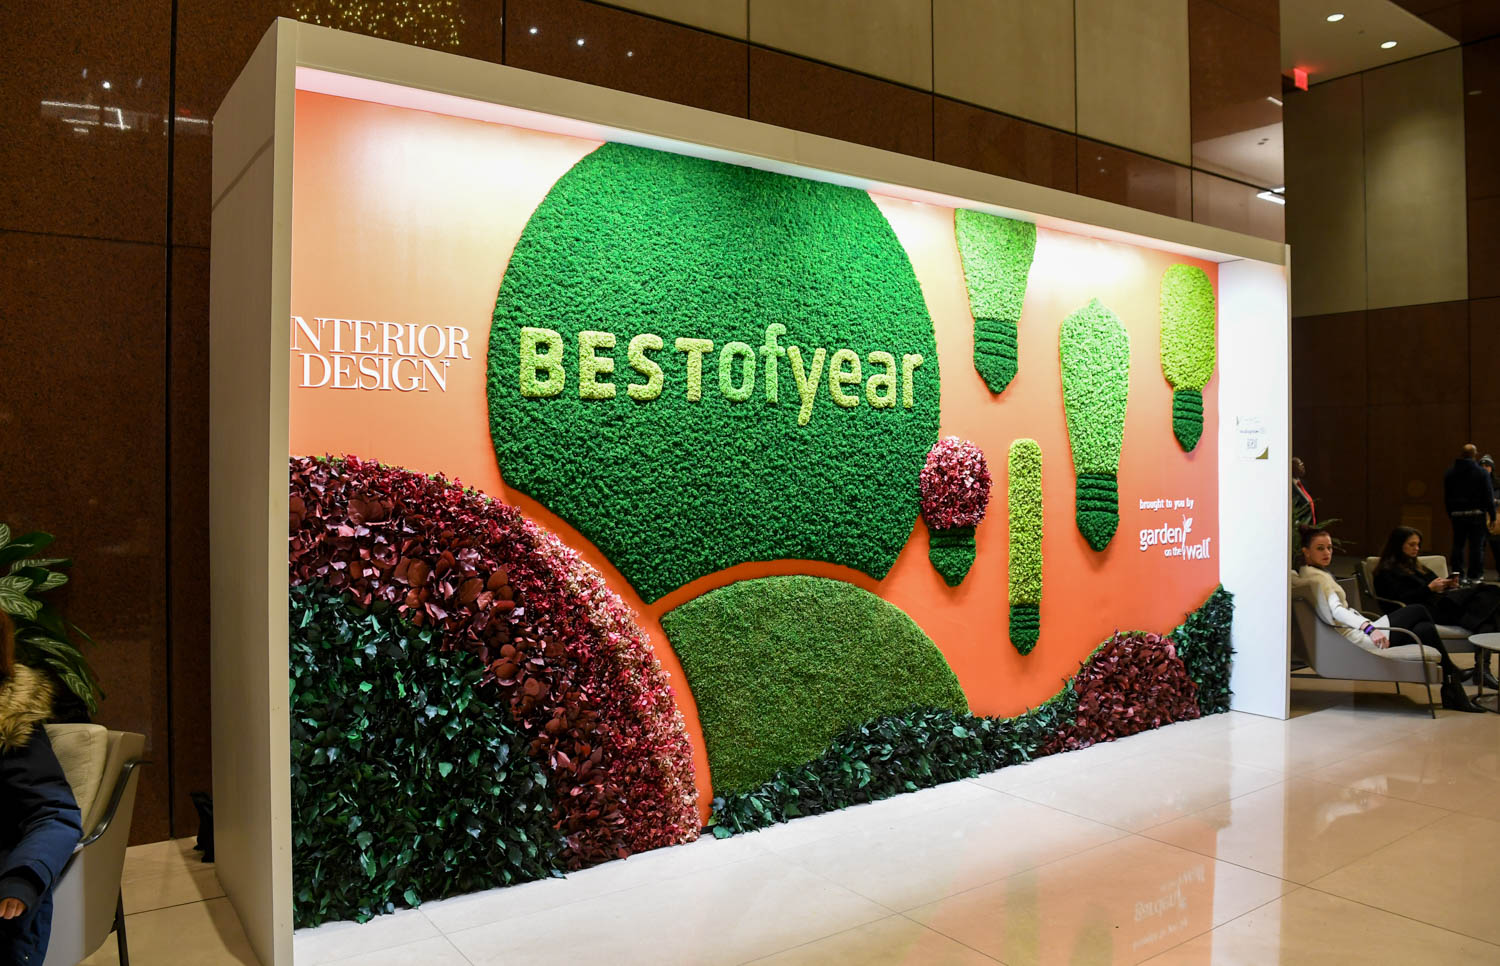 best of year garden installation on the wall